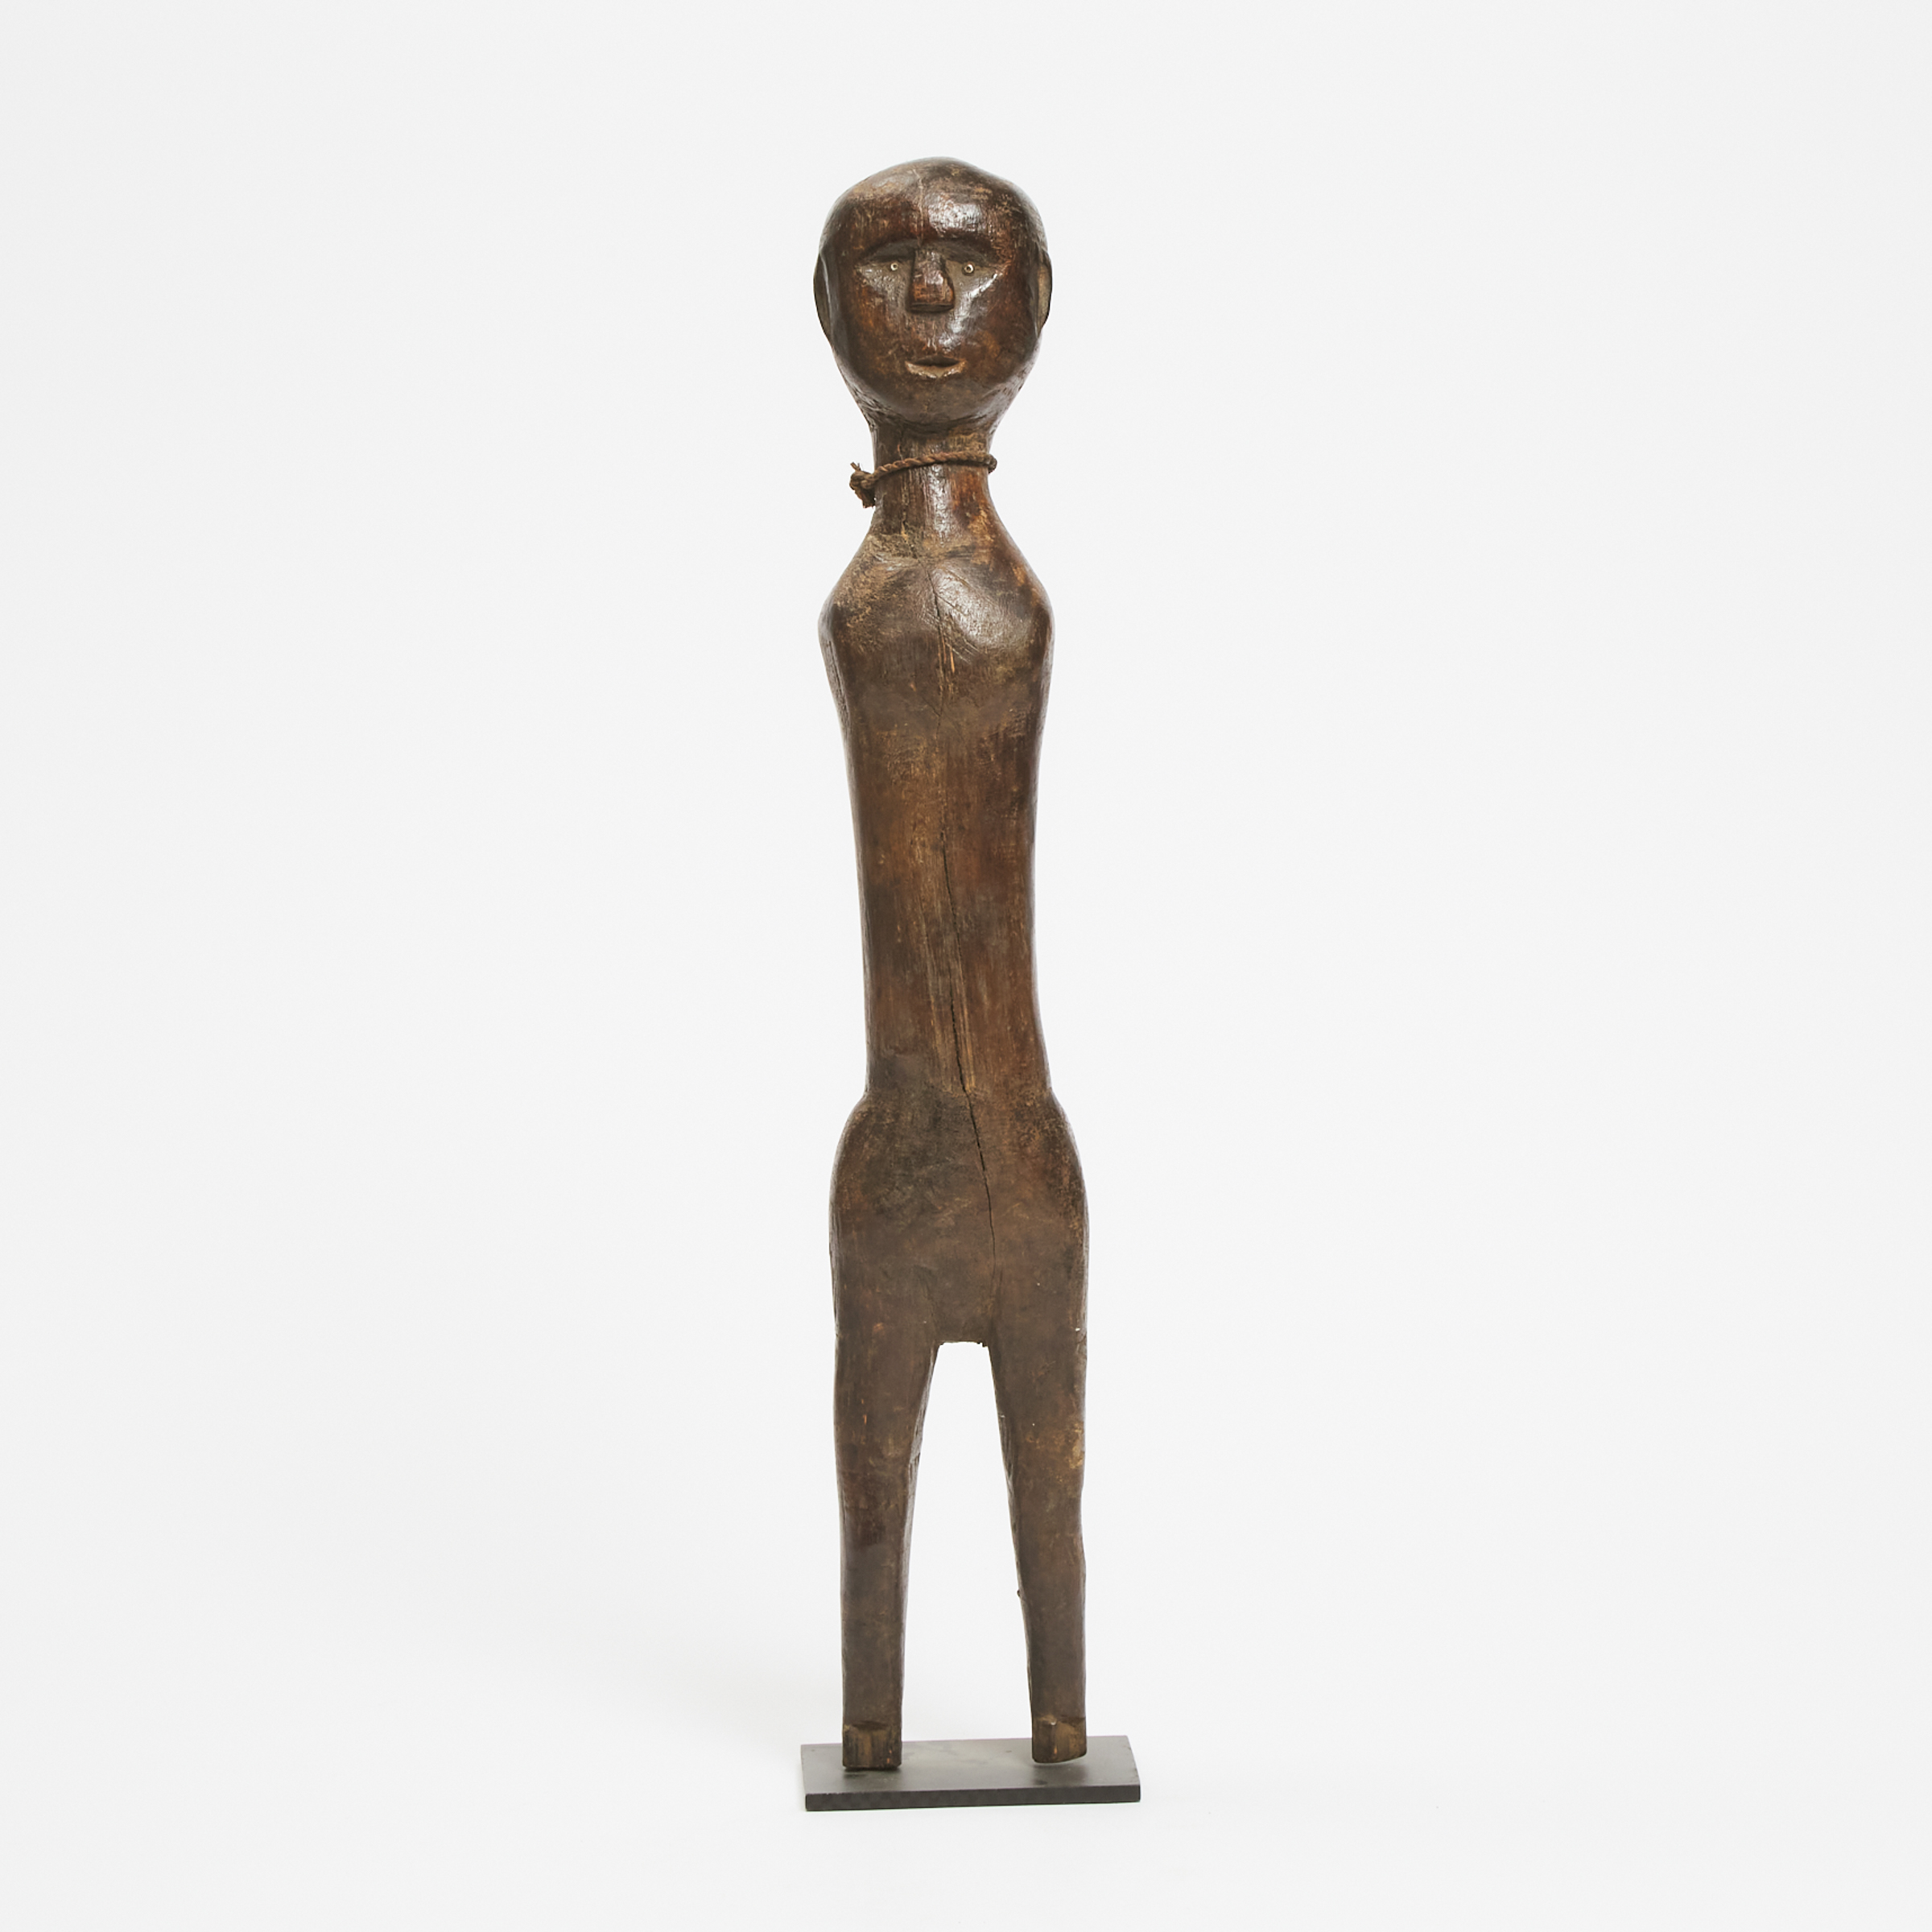 Tanzanian Standing Figure, possibly Nyamwezi, East Africa, early to mid 20th century